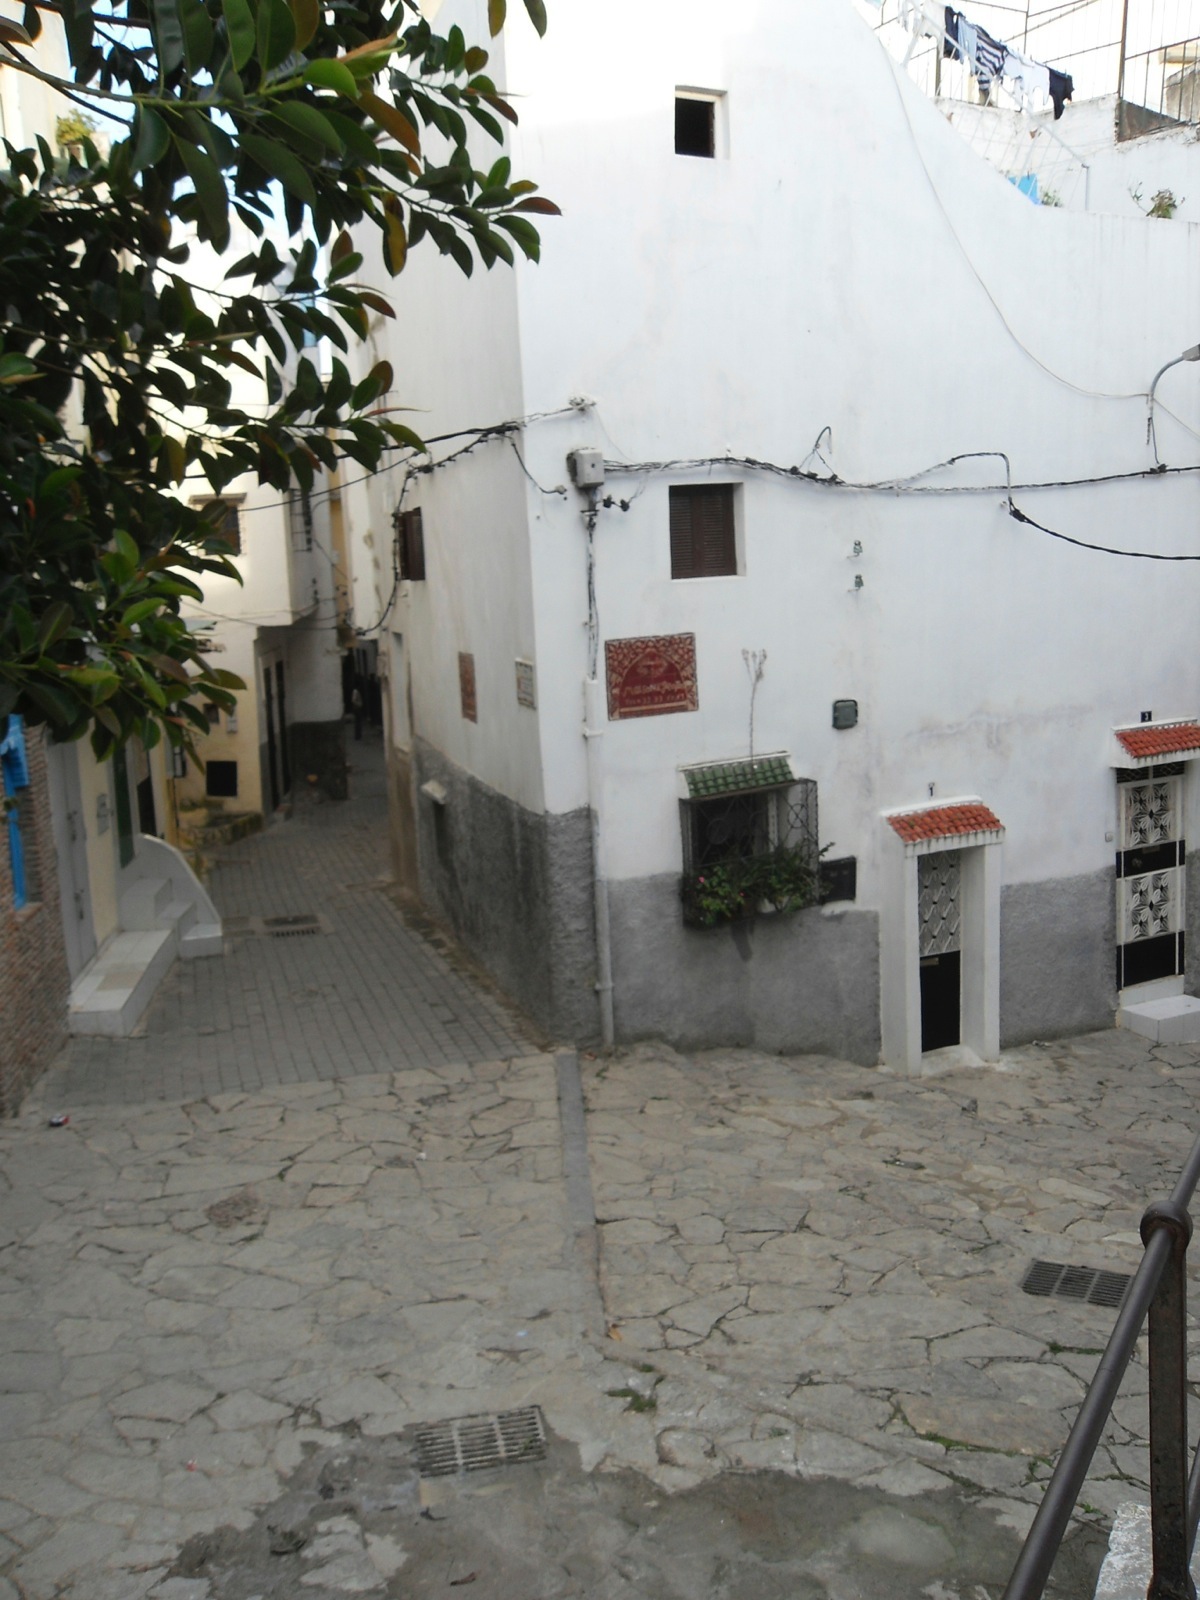 Parking outside the west Casbah gate